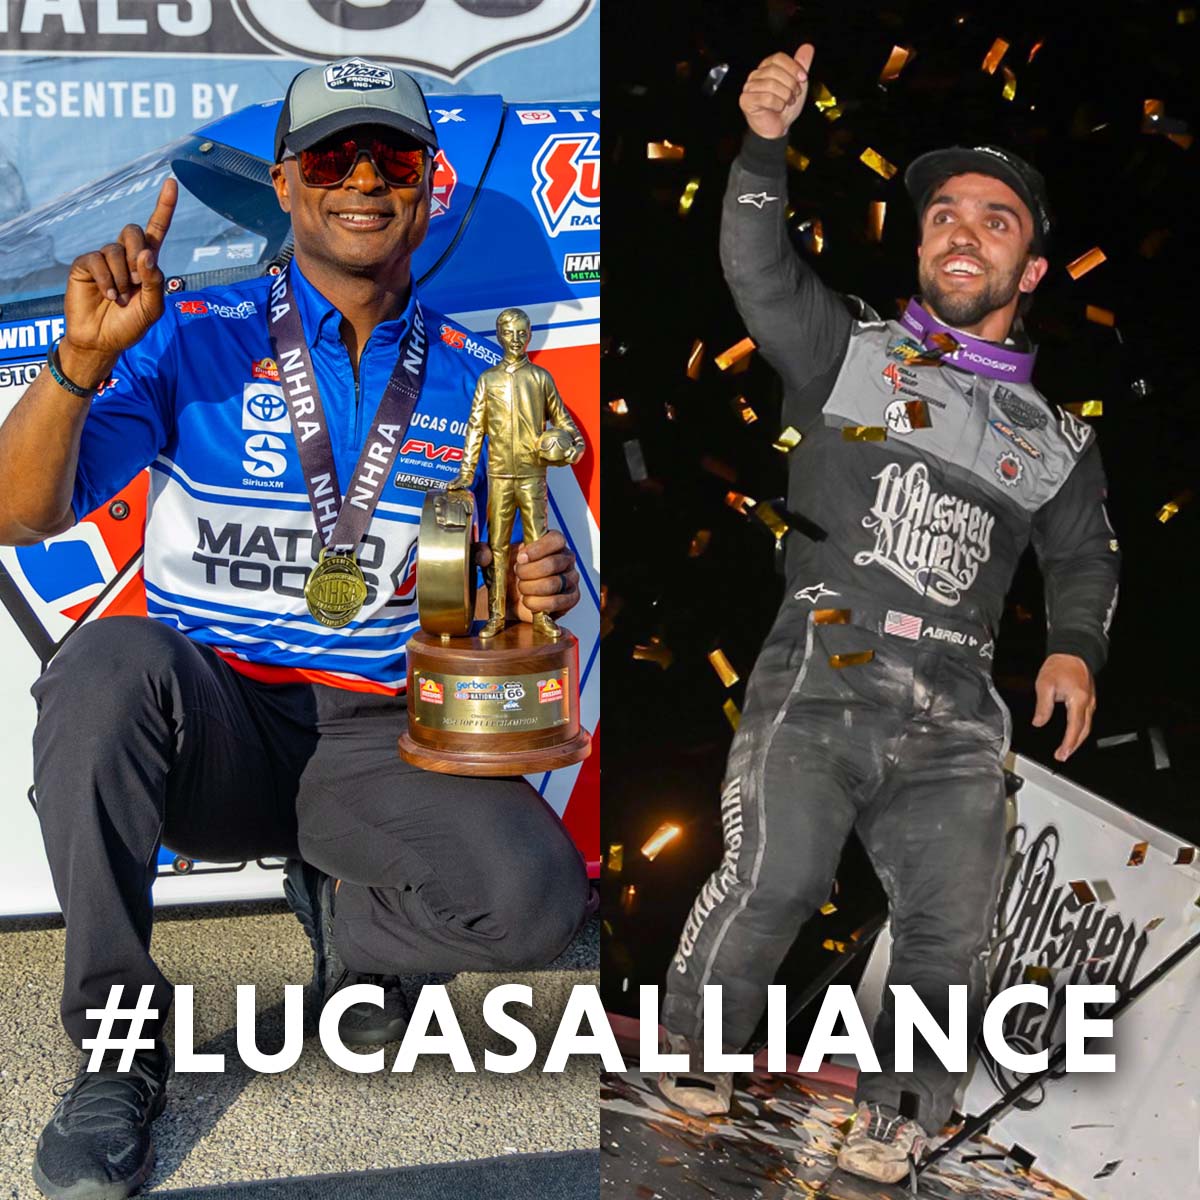 🔥 As May heats up, so does our #WinningWednesday! 🏆 Congratulations to @AntronBrown for clinching a sentimental @NHRA #TopFuel win at @Route66Raceway! 💪 Also in the spotlight is @Rico_Abreu with a @HighLimitRacing series win! 💨 Keep the momentum going, #LucasAlliance!